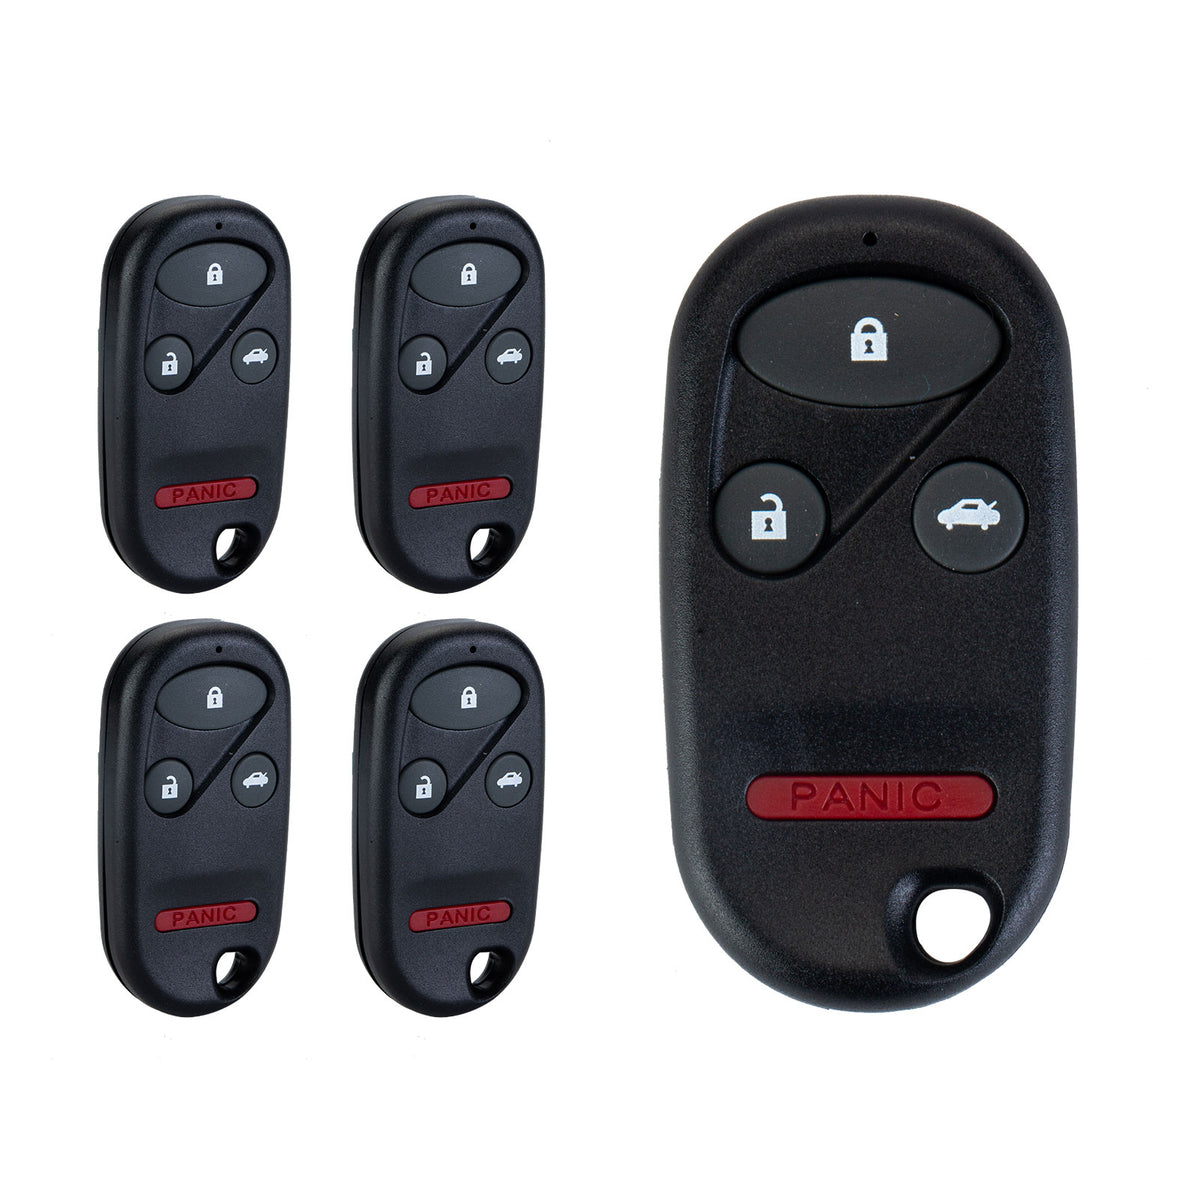 Lots of 5 Remote Car Key Fob Replacement for Honda KOBUTAH2T fits 1998 1999 2000 2001 2002 CR-V 4 Button